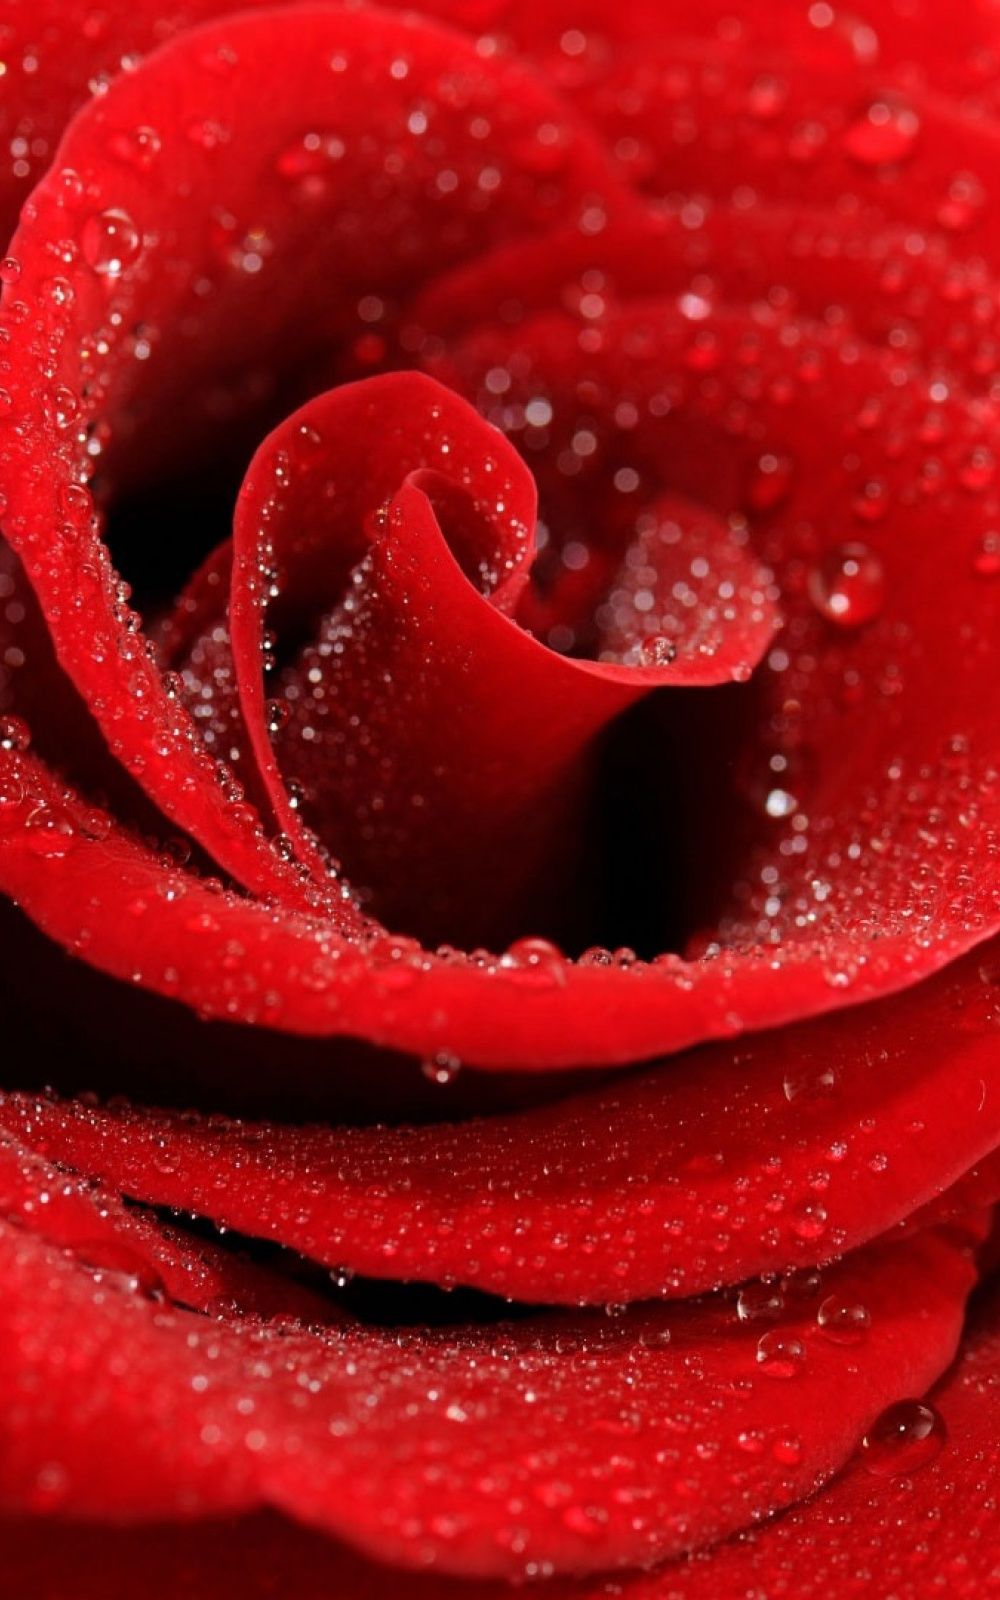 Best of aesthetic red rose iphone wallpaper on wallpaper iphone